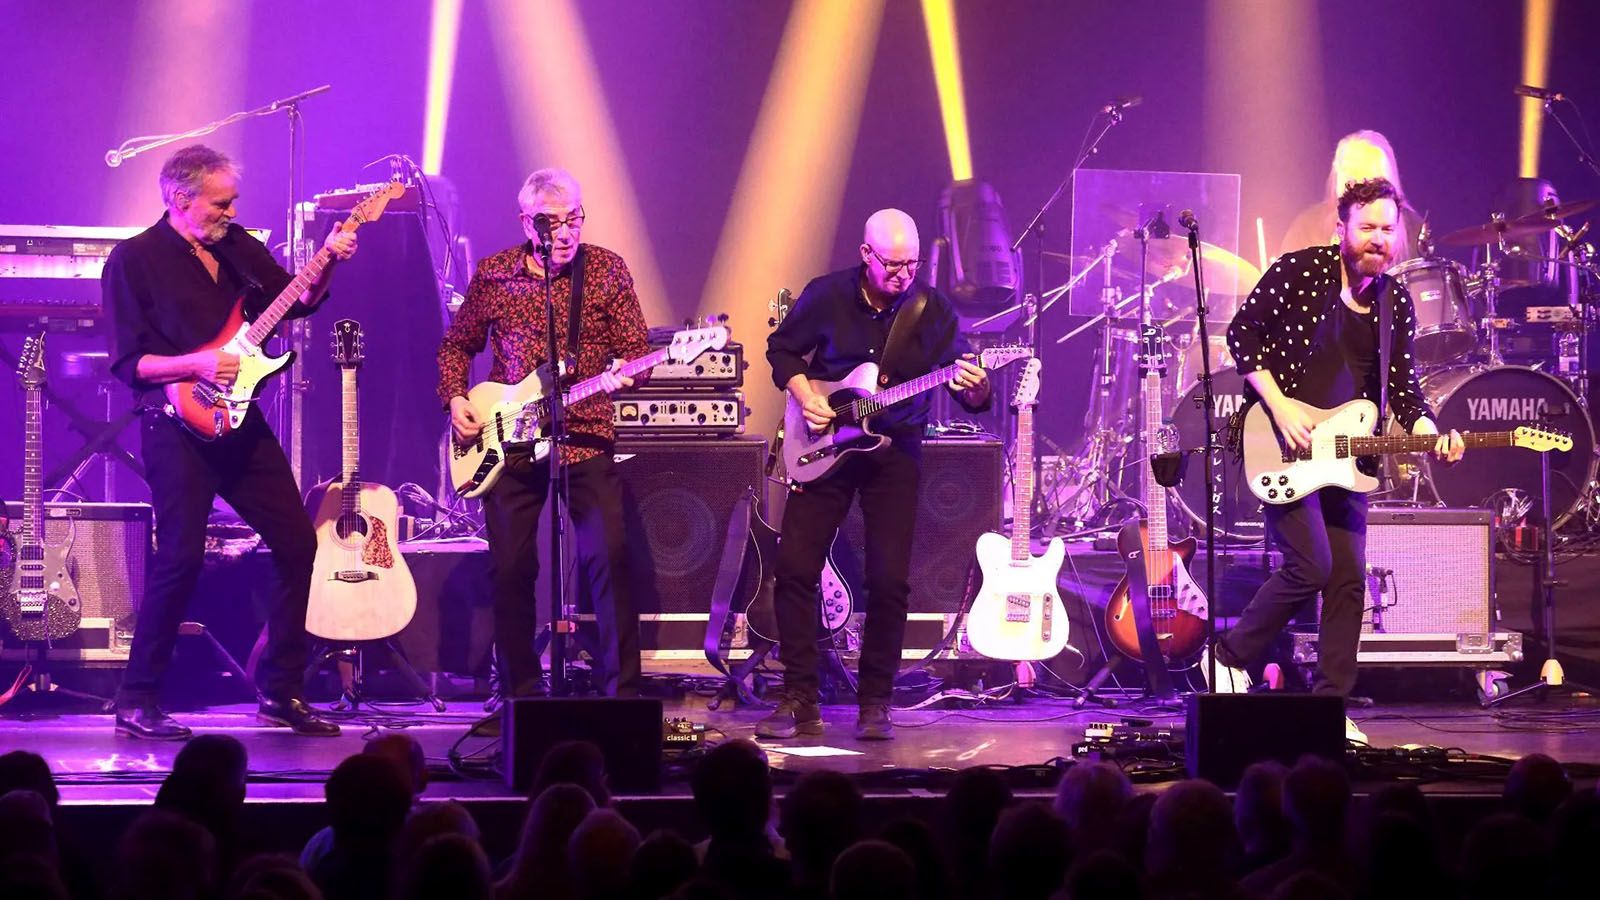 10cc is set to embark on their first U.S. tour since 1978.